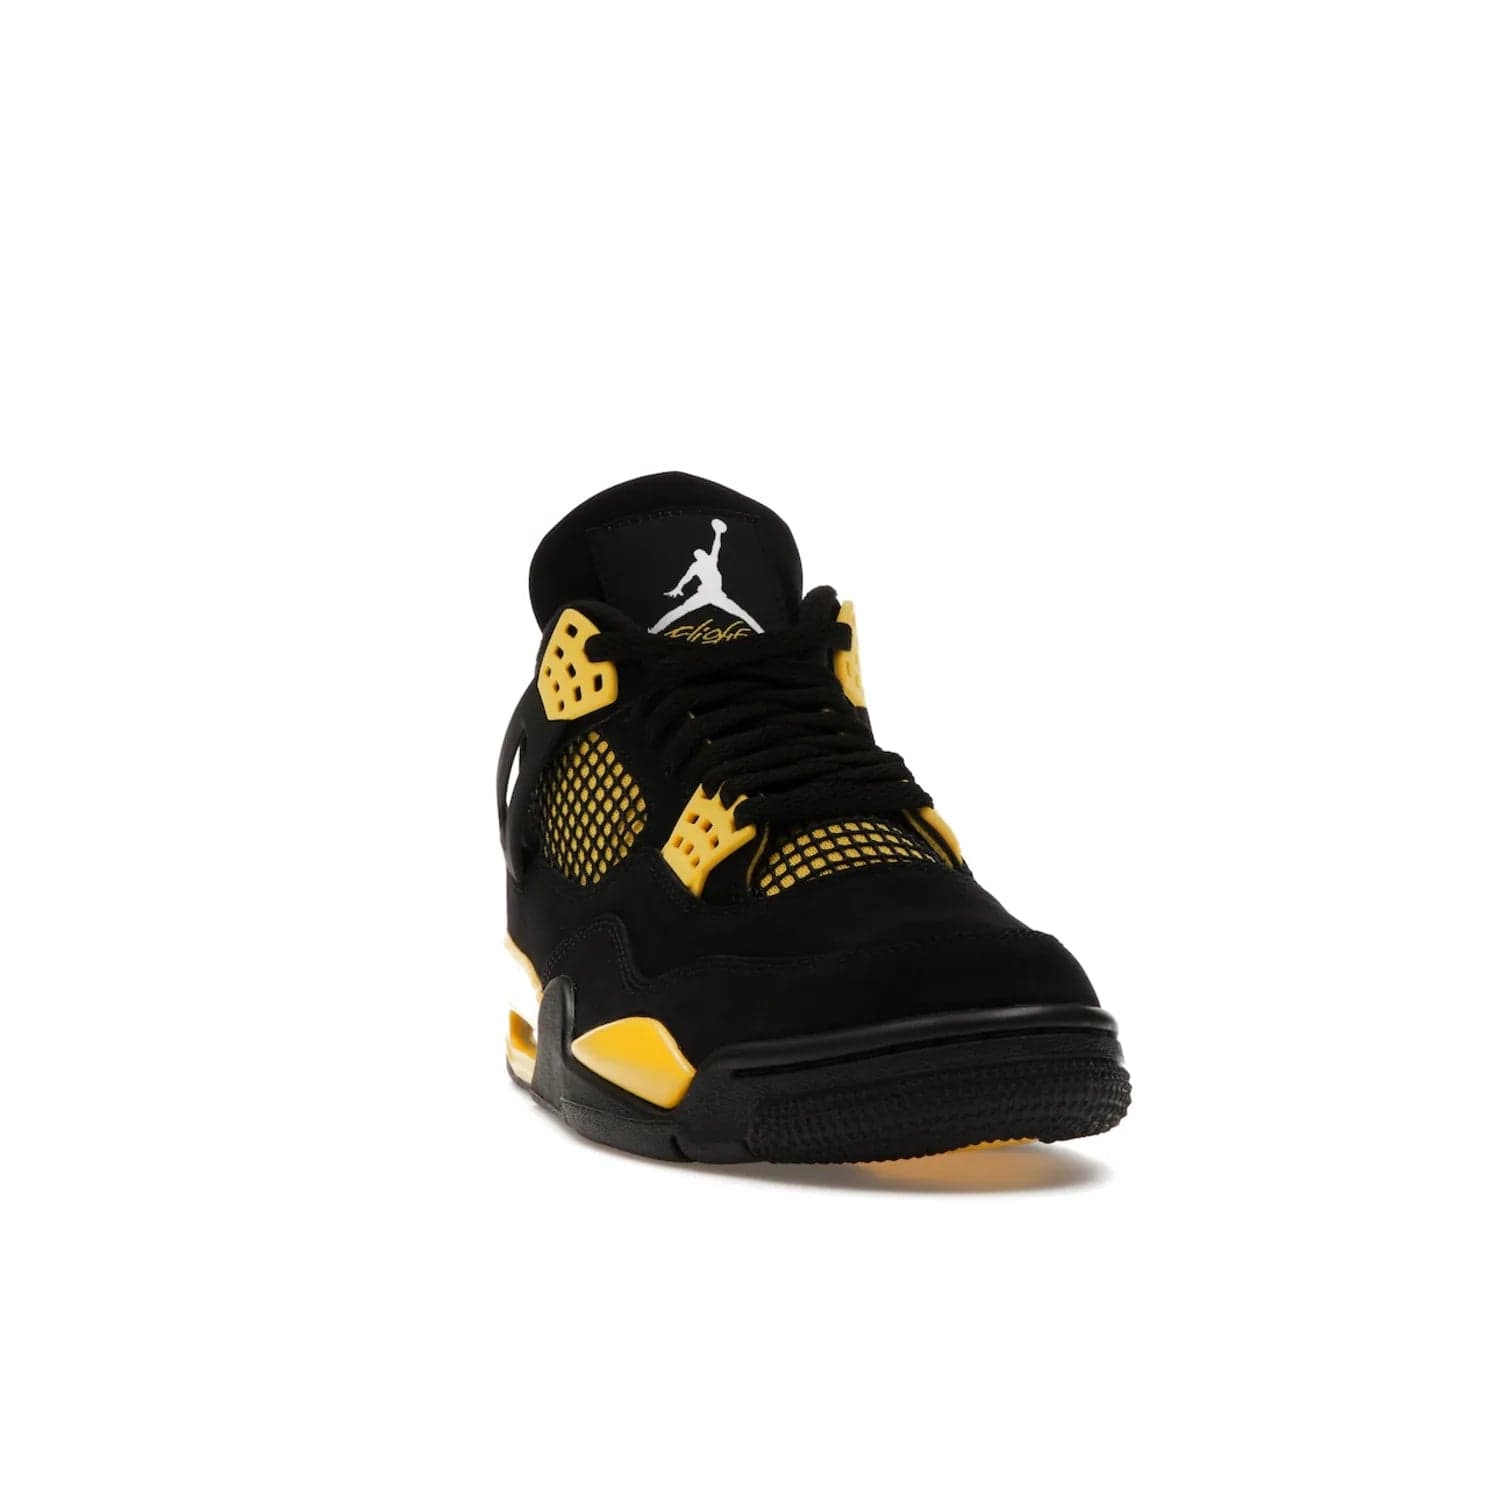 Jordan 4 Retro Thunder (2023) - Image 8 - Only at www.BallersClubKickz.com - Iconic Air Jordan 4 Retro Thunder (2023) returns with black nubuck upper and Tour Yellow details. Featuring Jumpman logo on heel tab, tongue and insoles. Dropping May 13th, 2023.